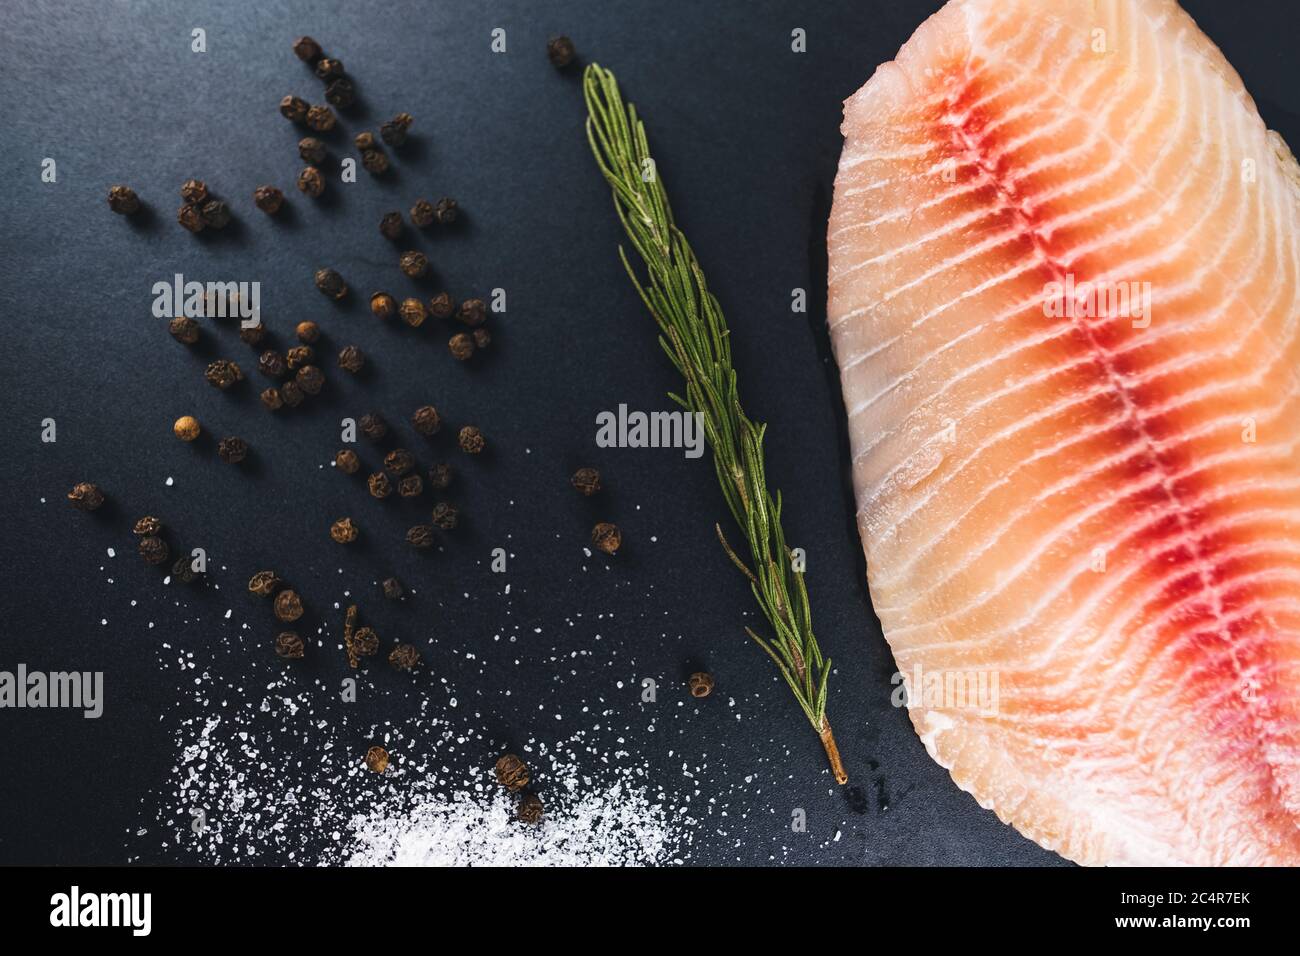 Fresh fillet of white tilapia fish laid out against a black background. Stock Photo